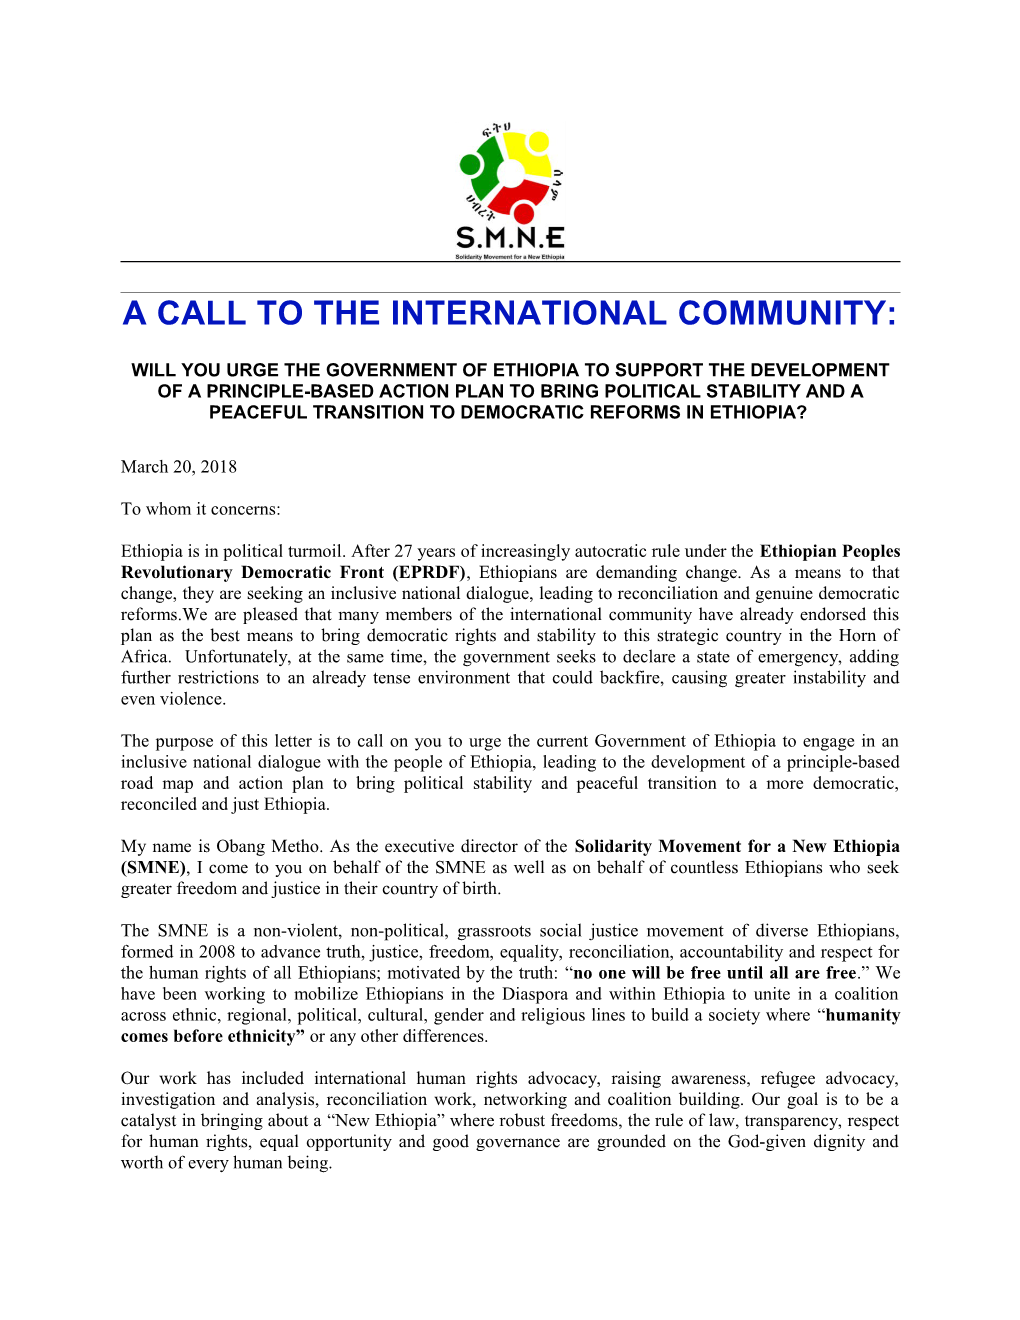 A Call to the International Community